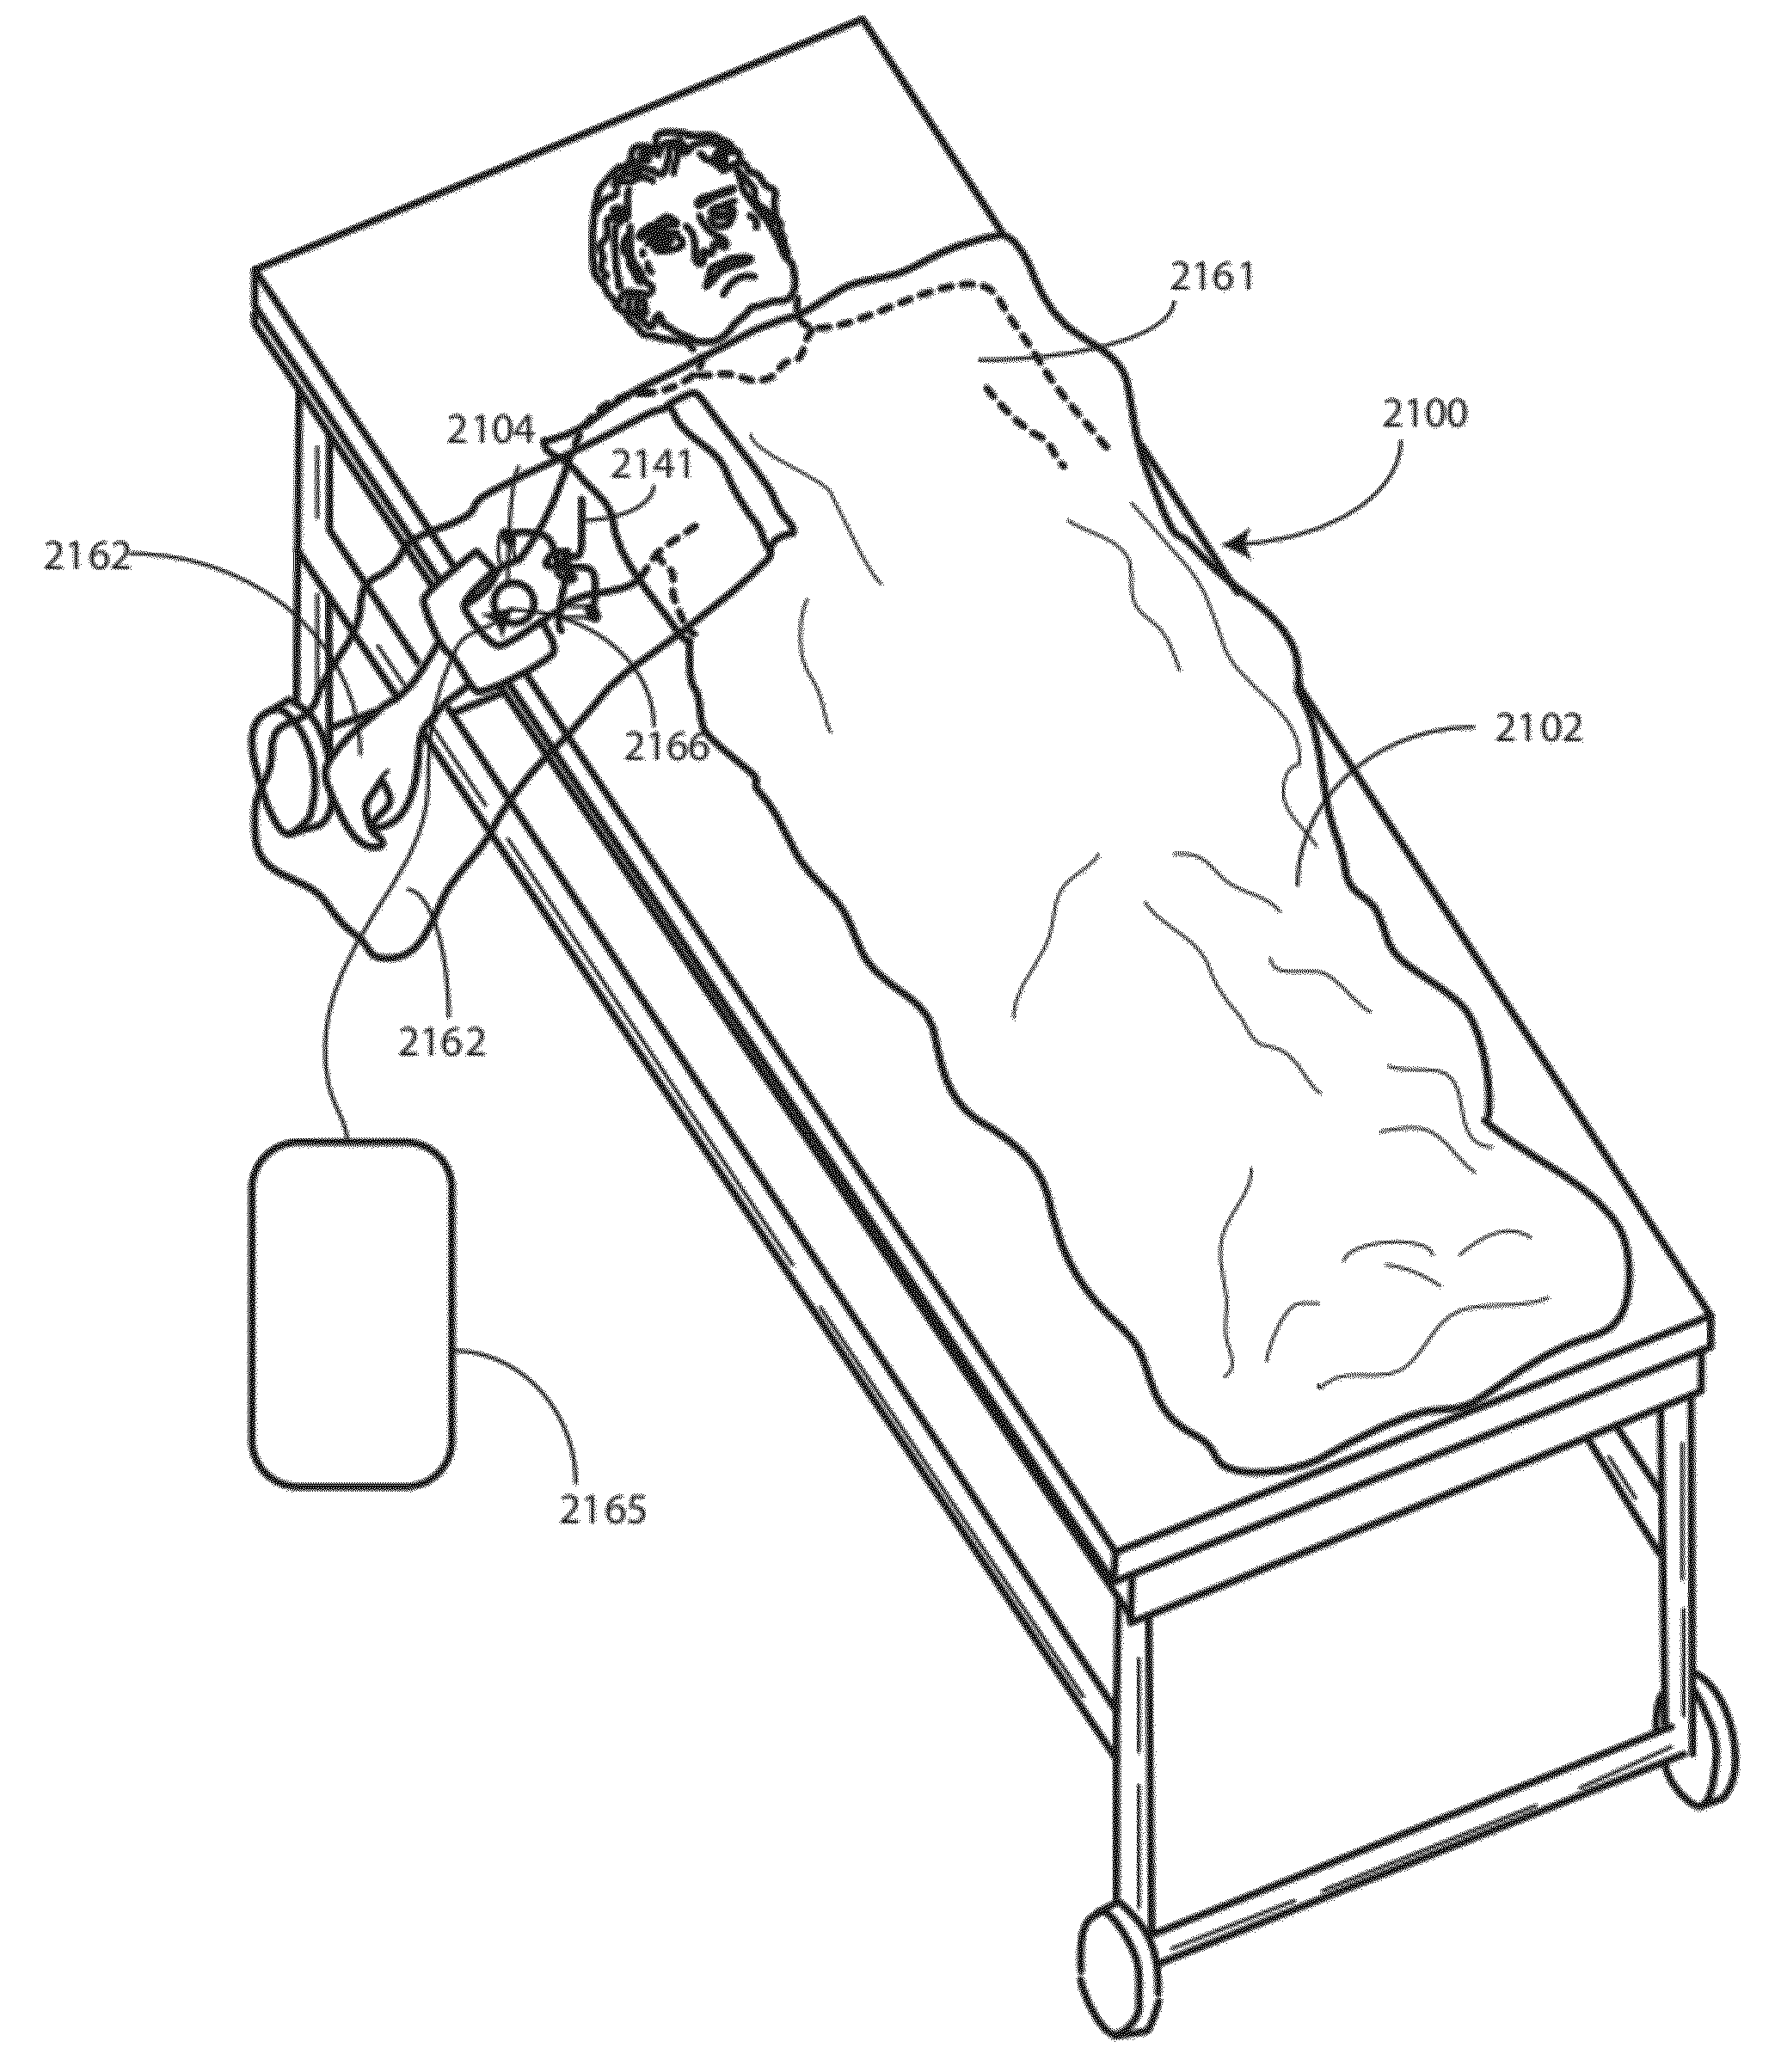 Surgical Drape Configured for Peripherally Inserted Central Catheter Procedures